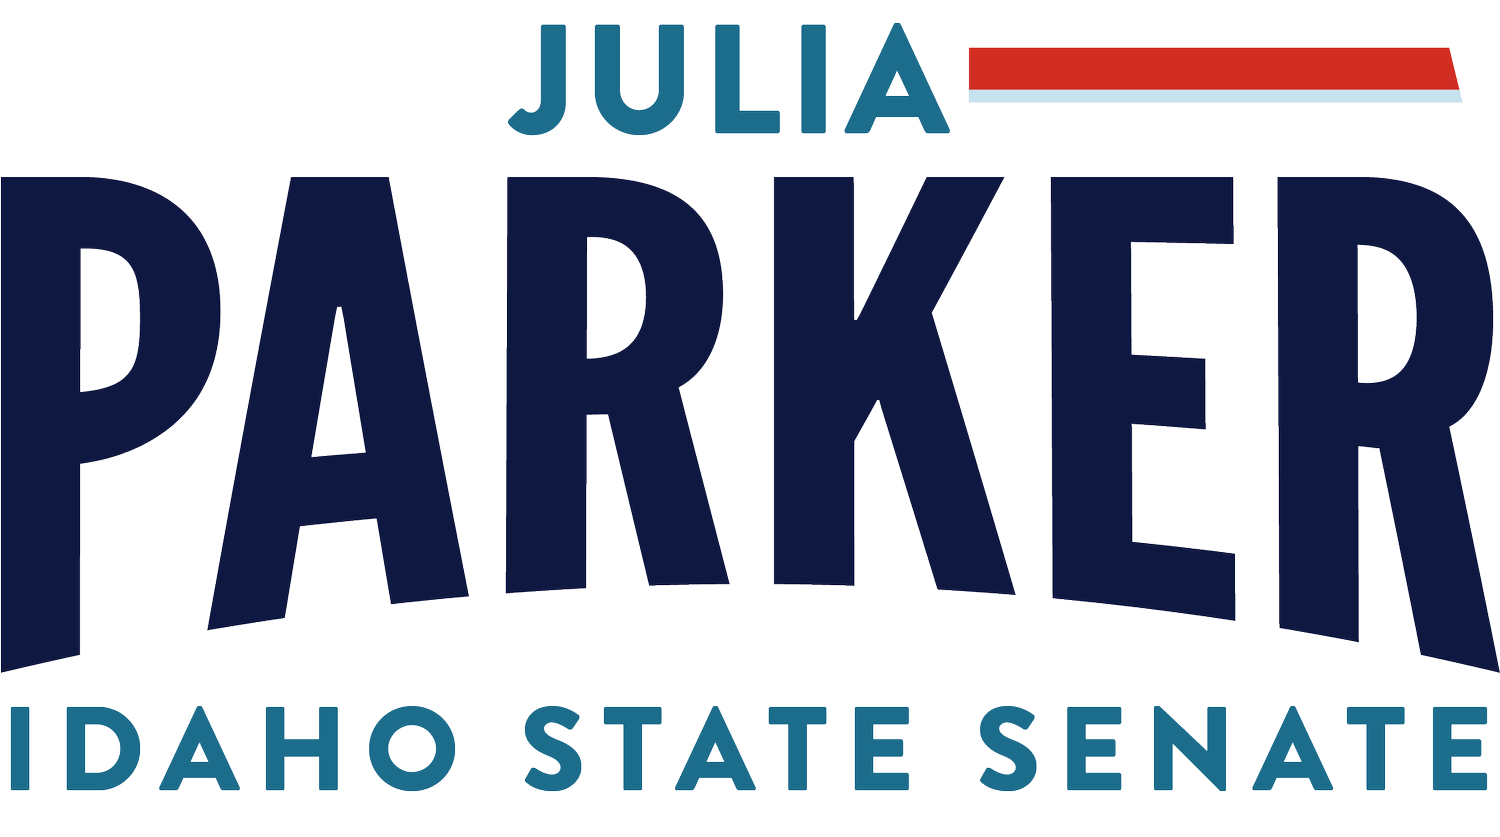 Julia Parker for Moscow City Council